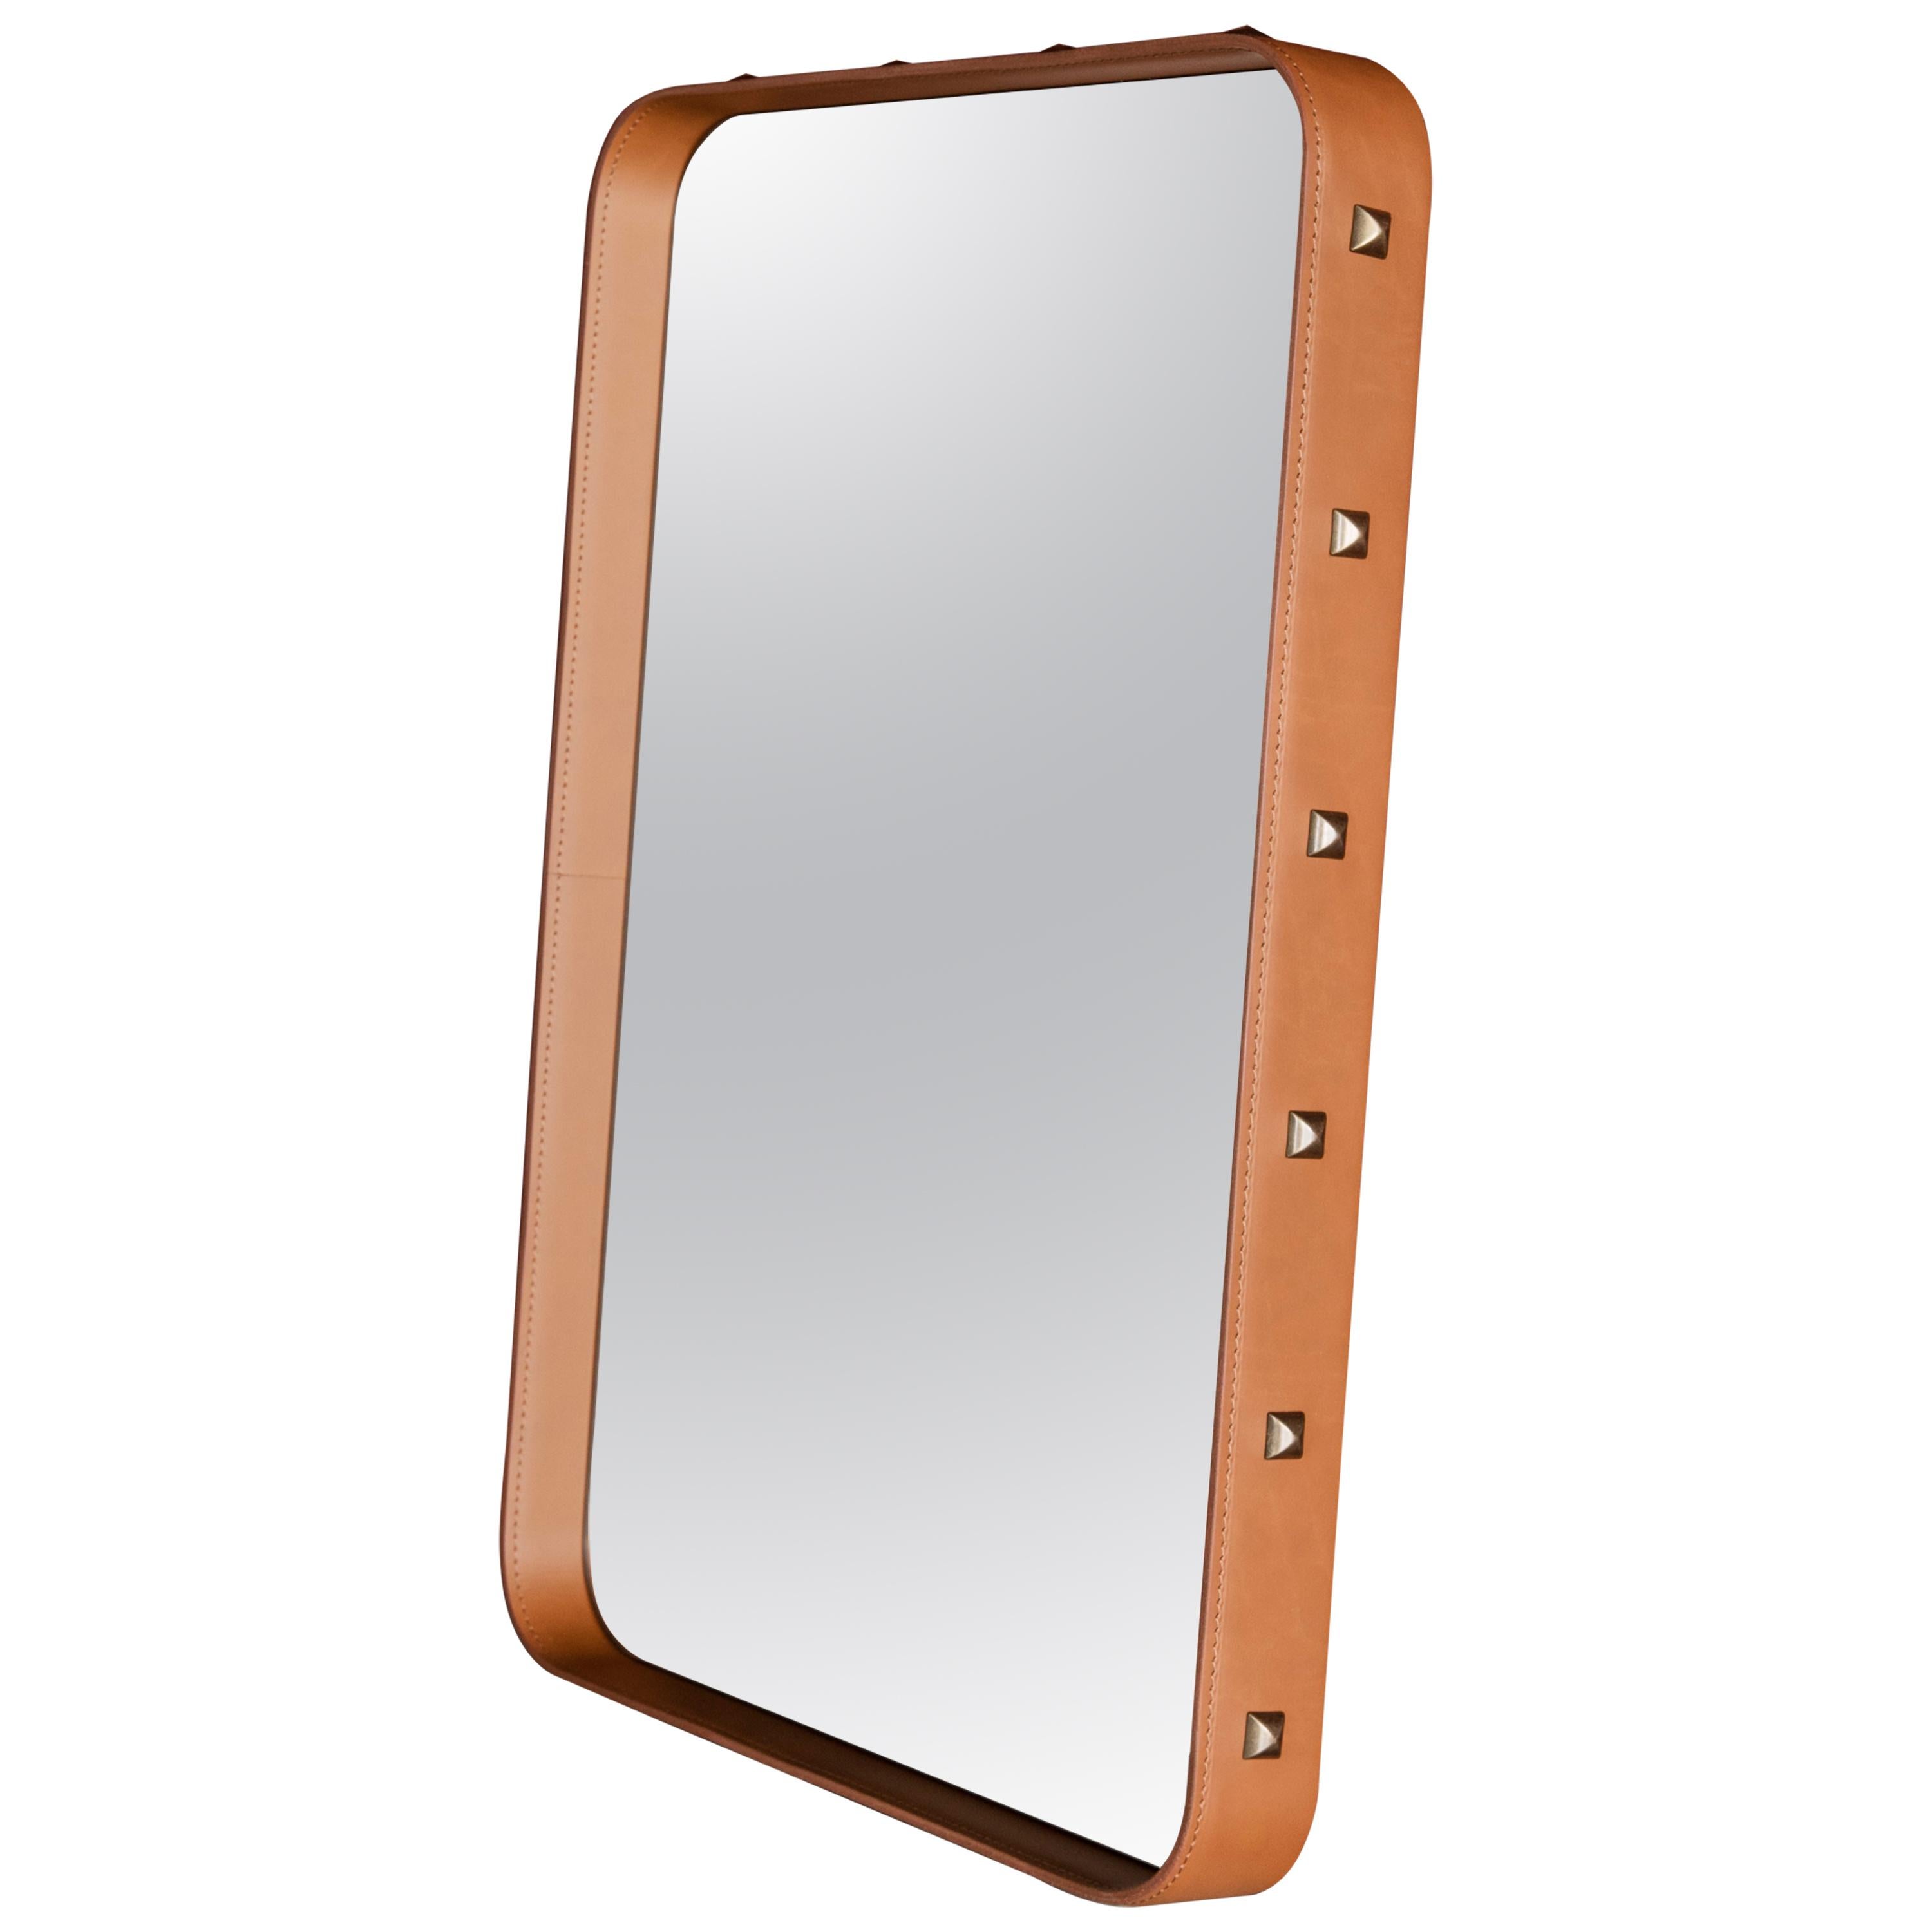 Small Jacques Adnet 'Rectangulaire' Wall Mirror in Tan Leather for GUBI